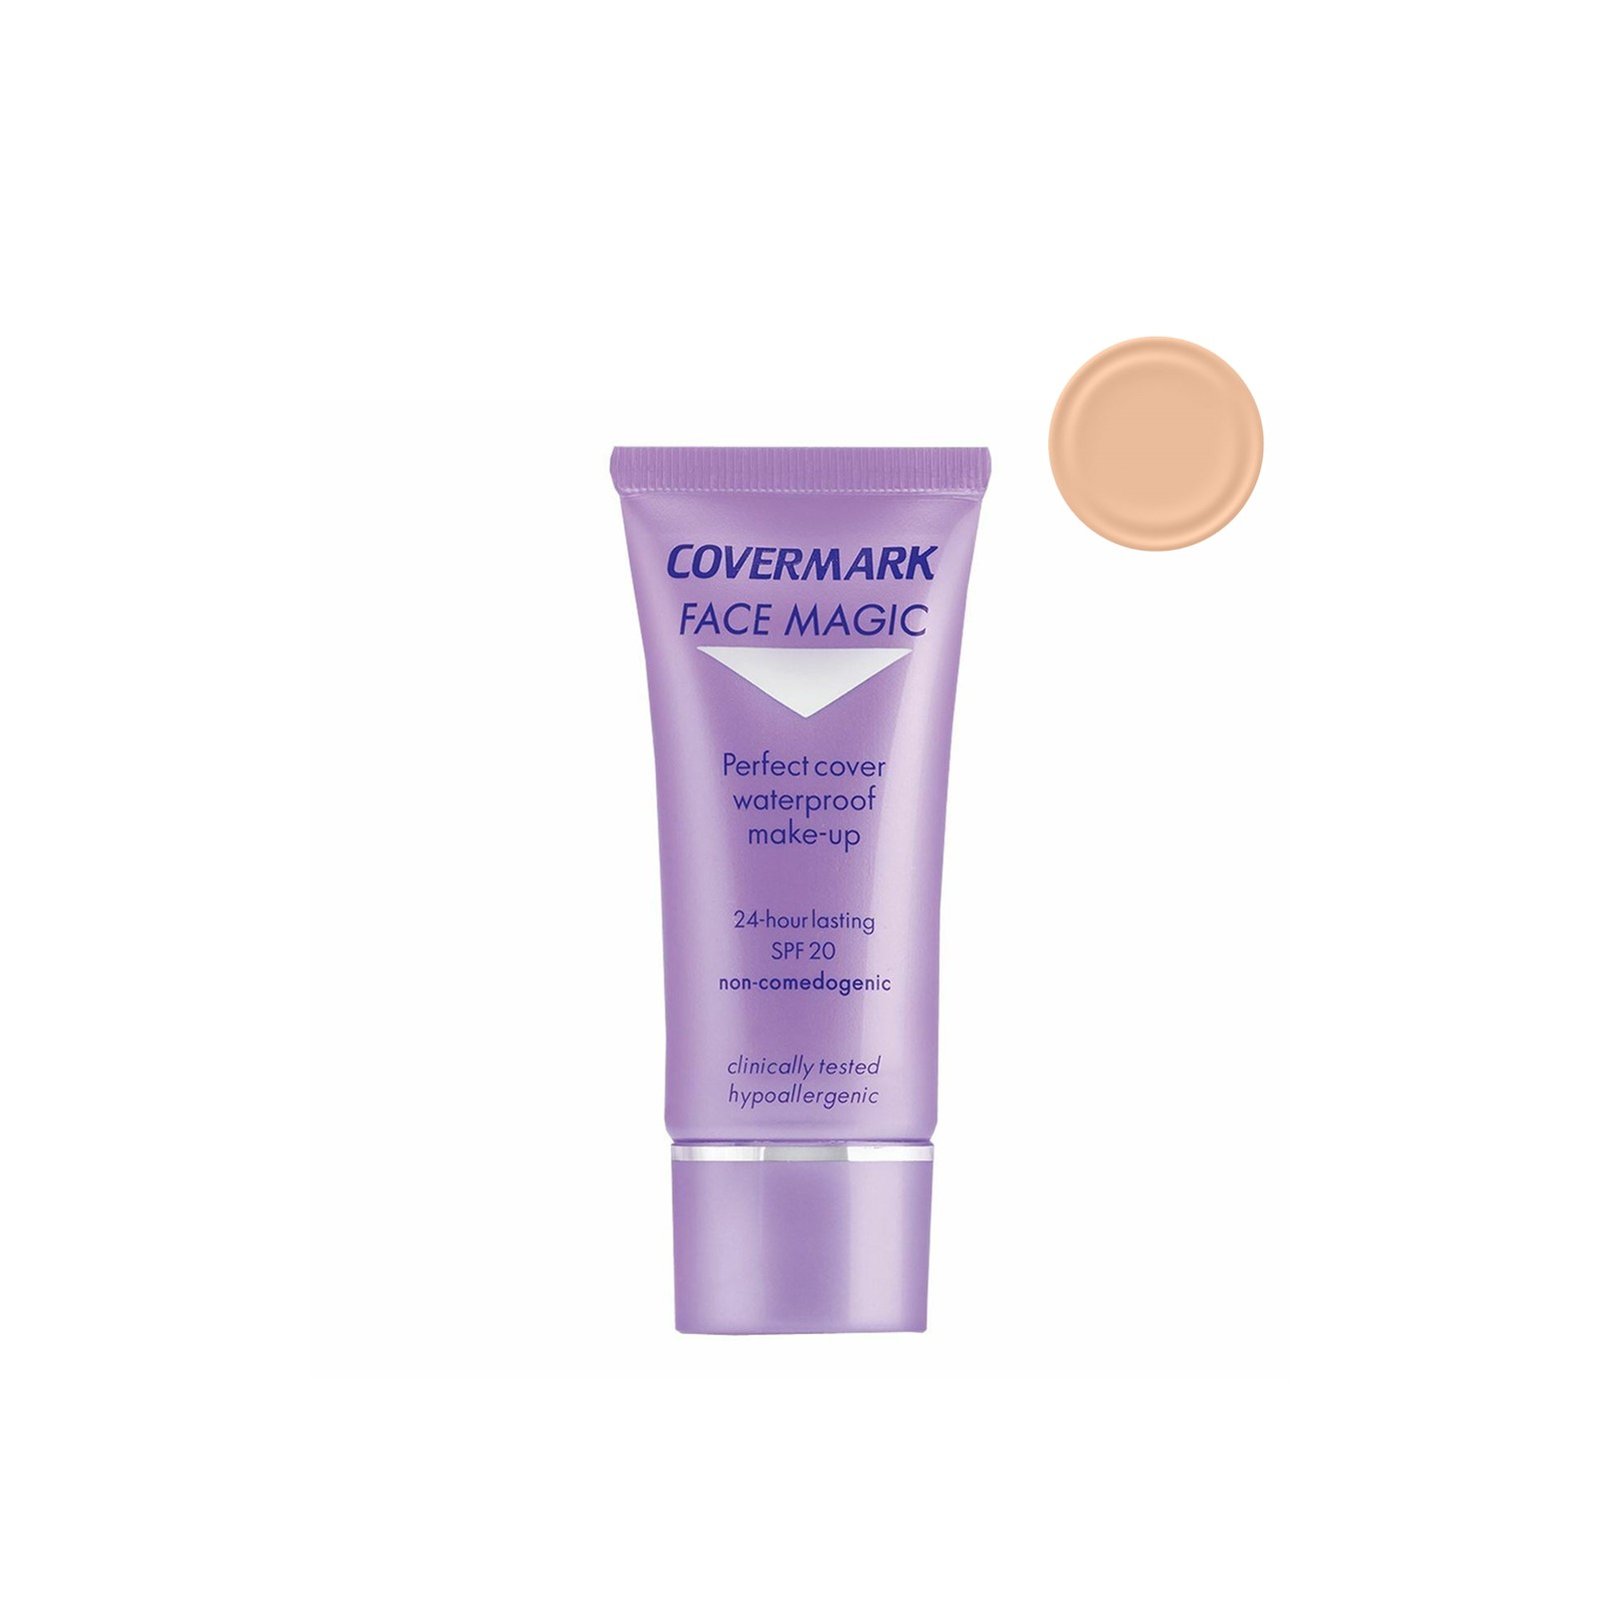 Covermark Face Magic Perfect Cover Waterproof Make-Up SPF20